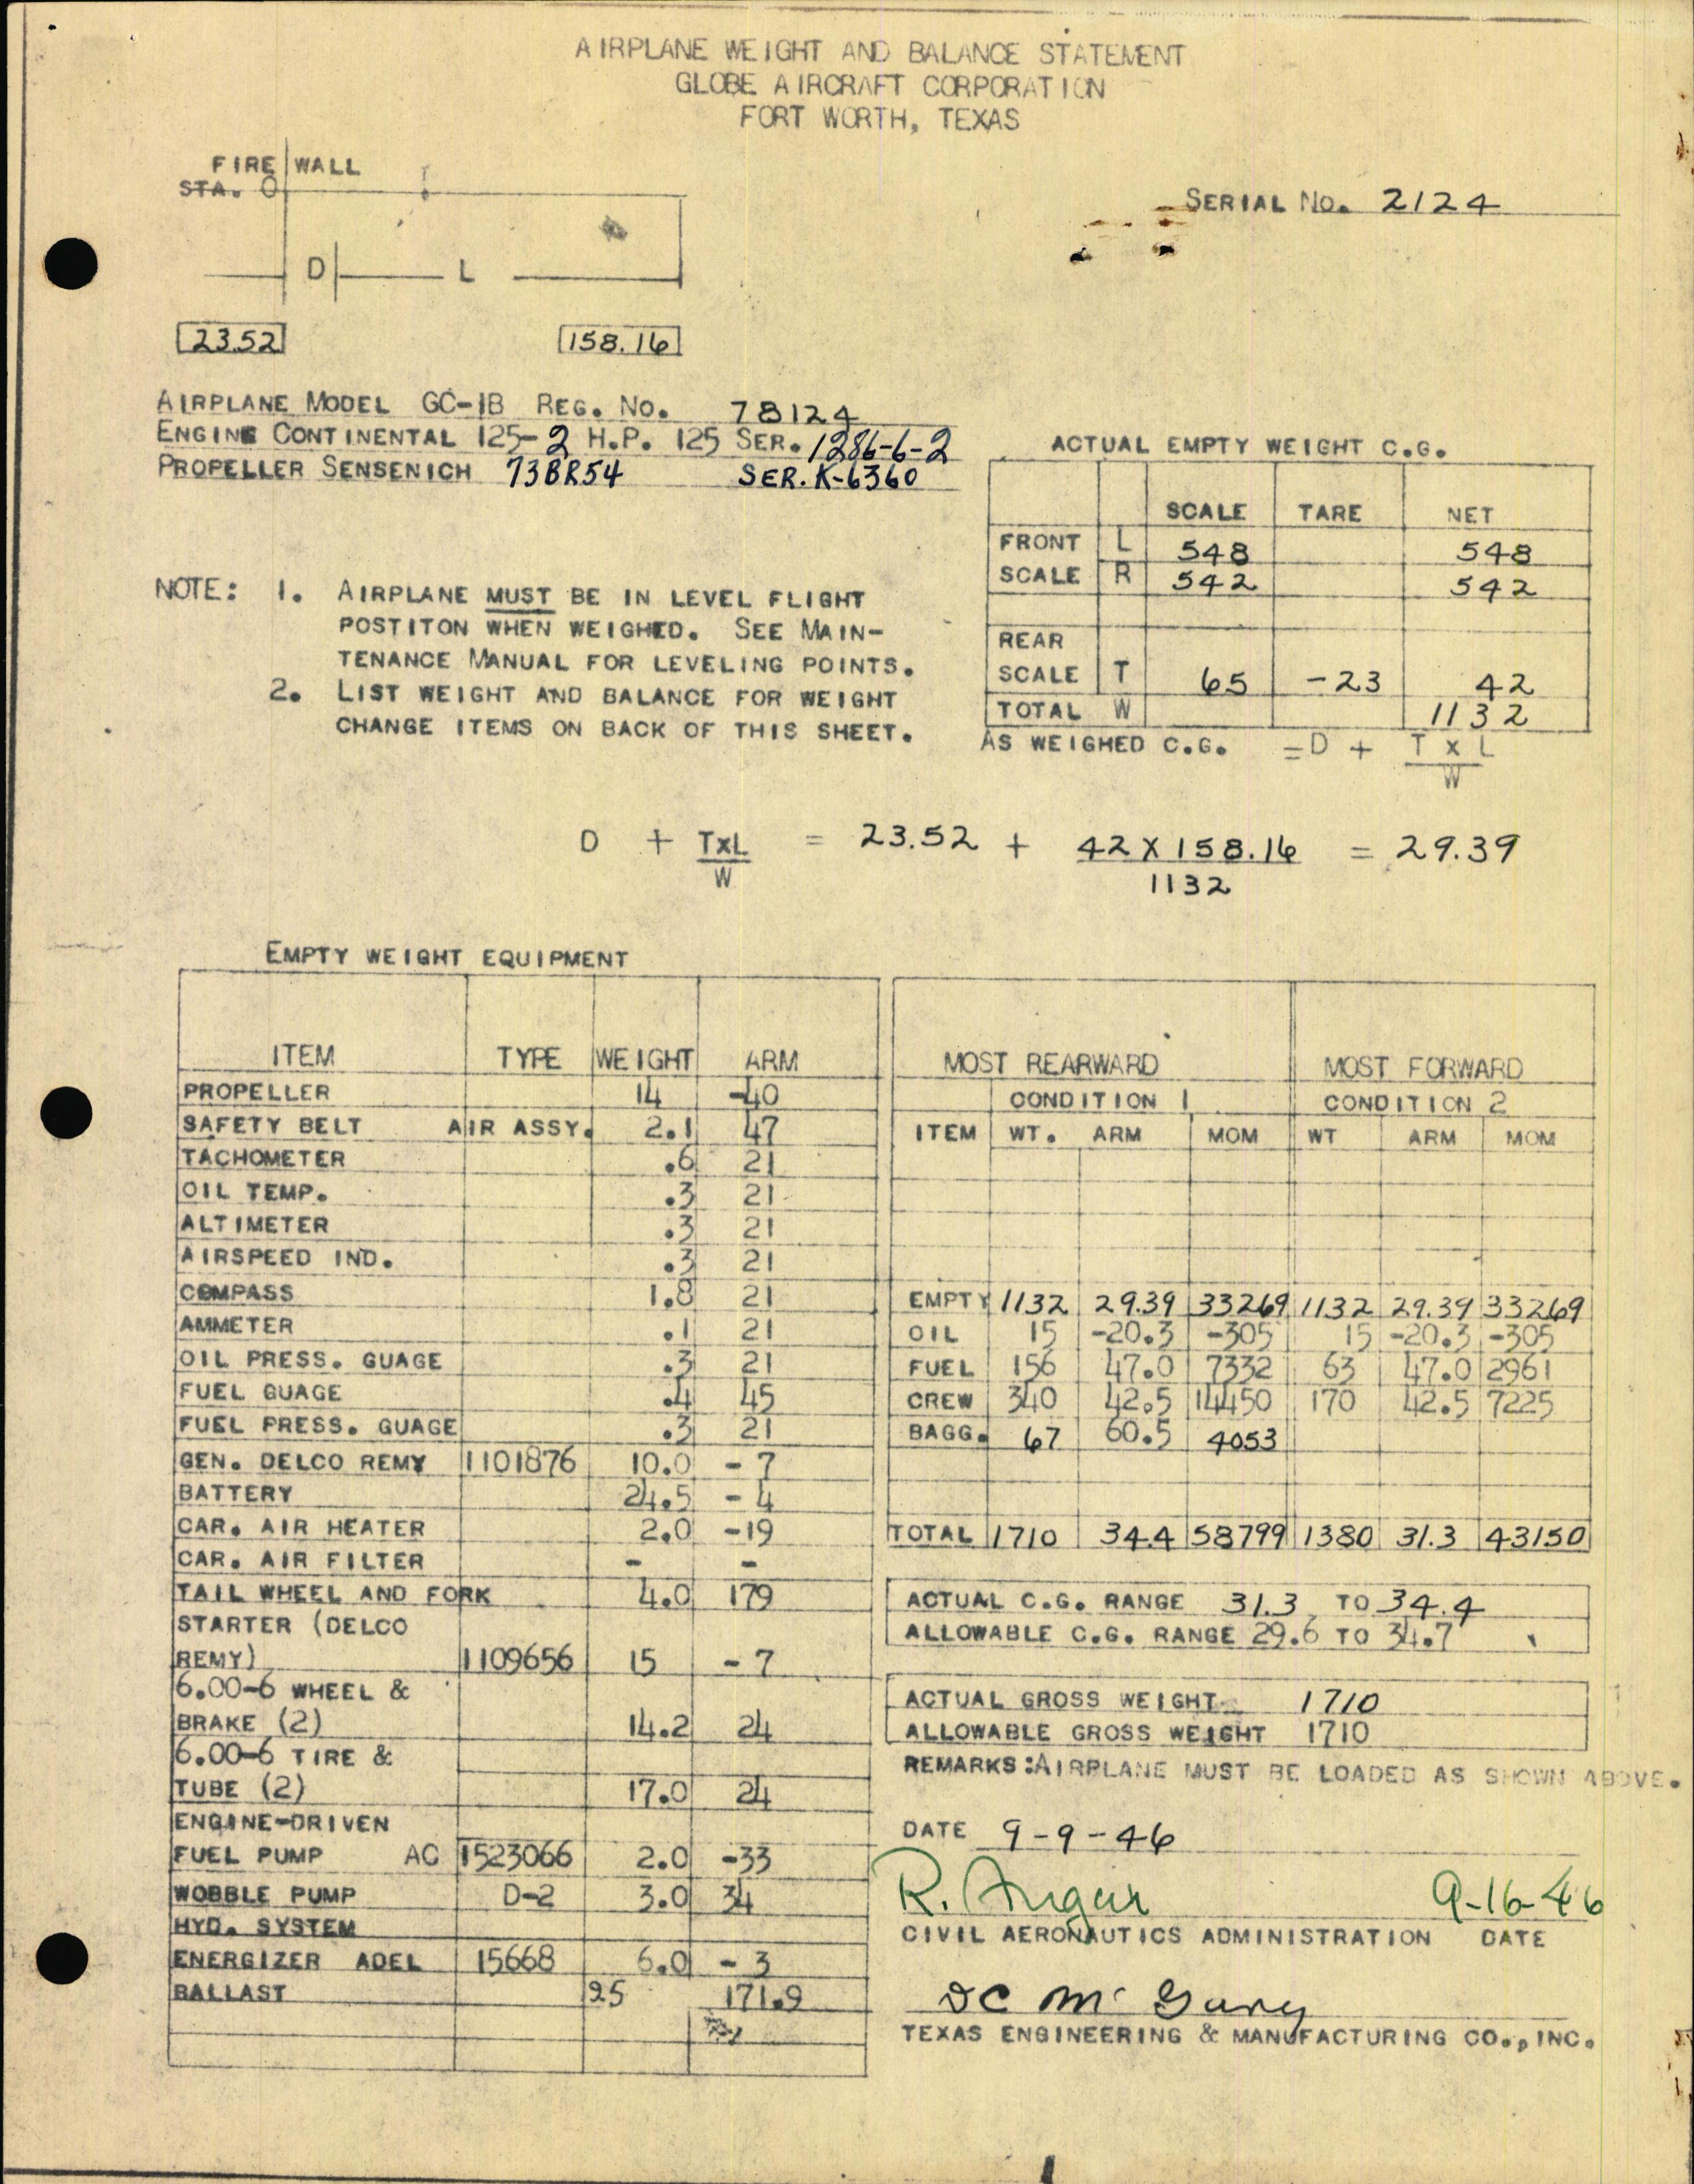 Sample page 1 from AirCorps Library document: Technical Information for Serial Number 2124